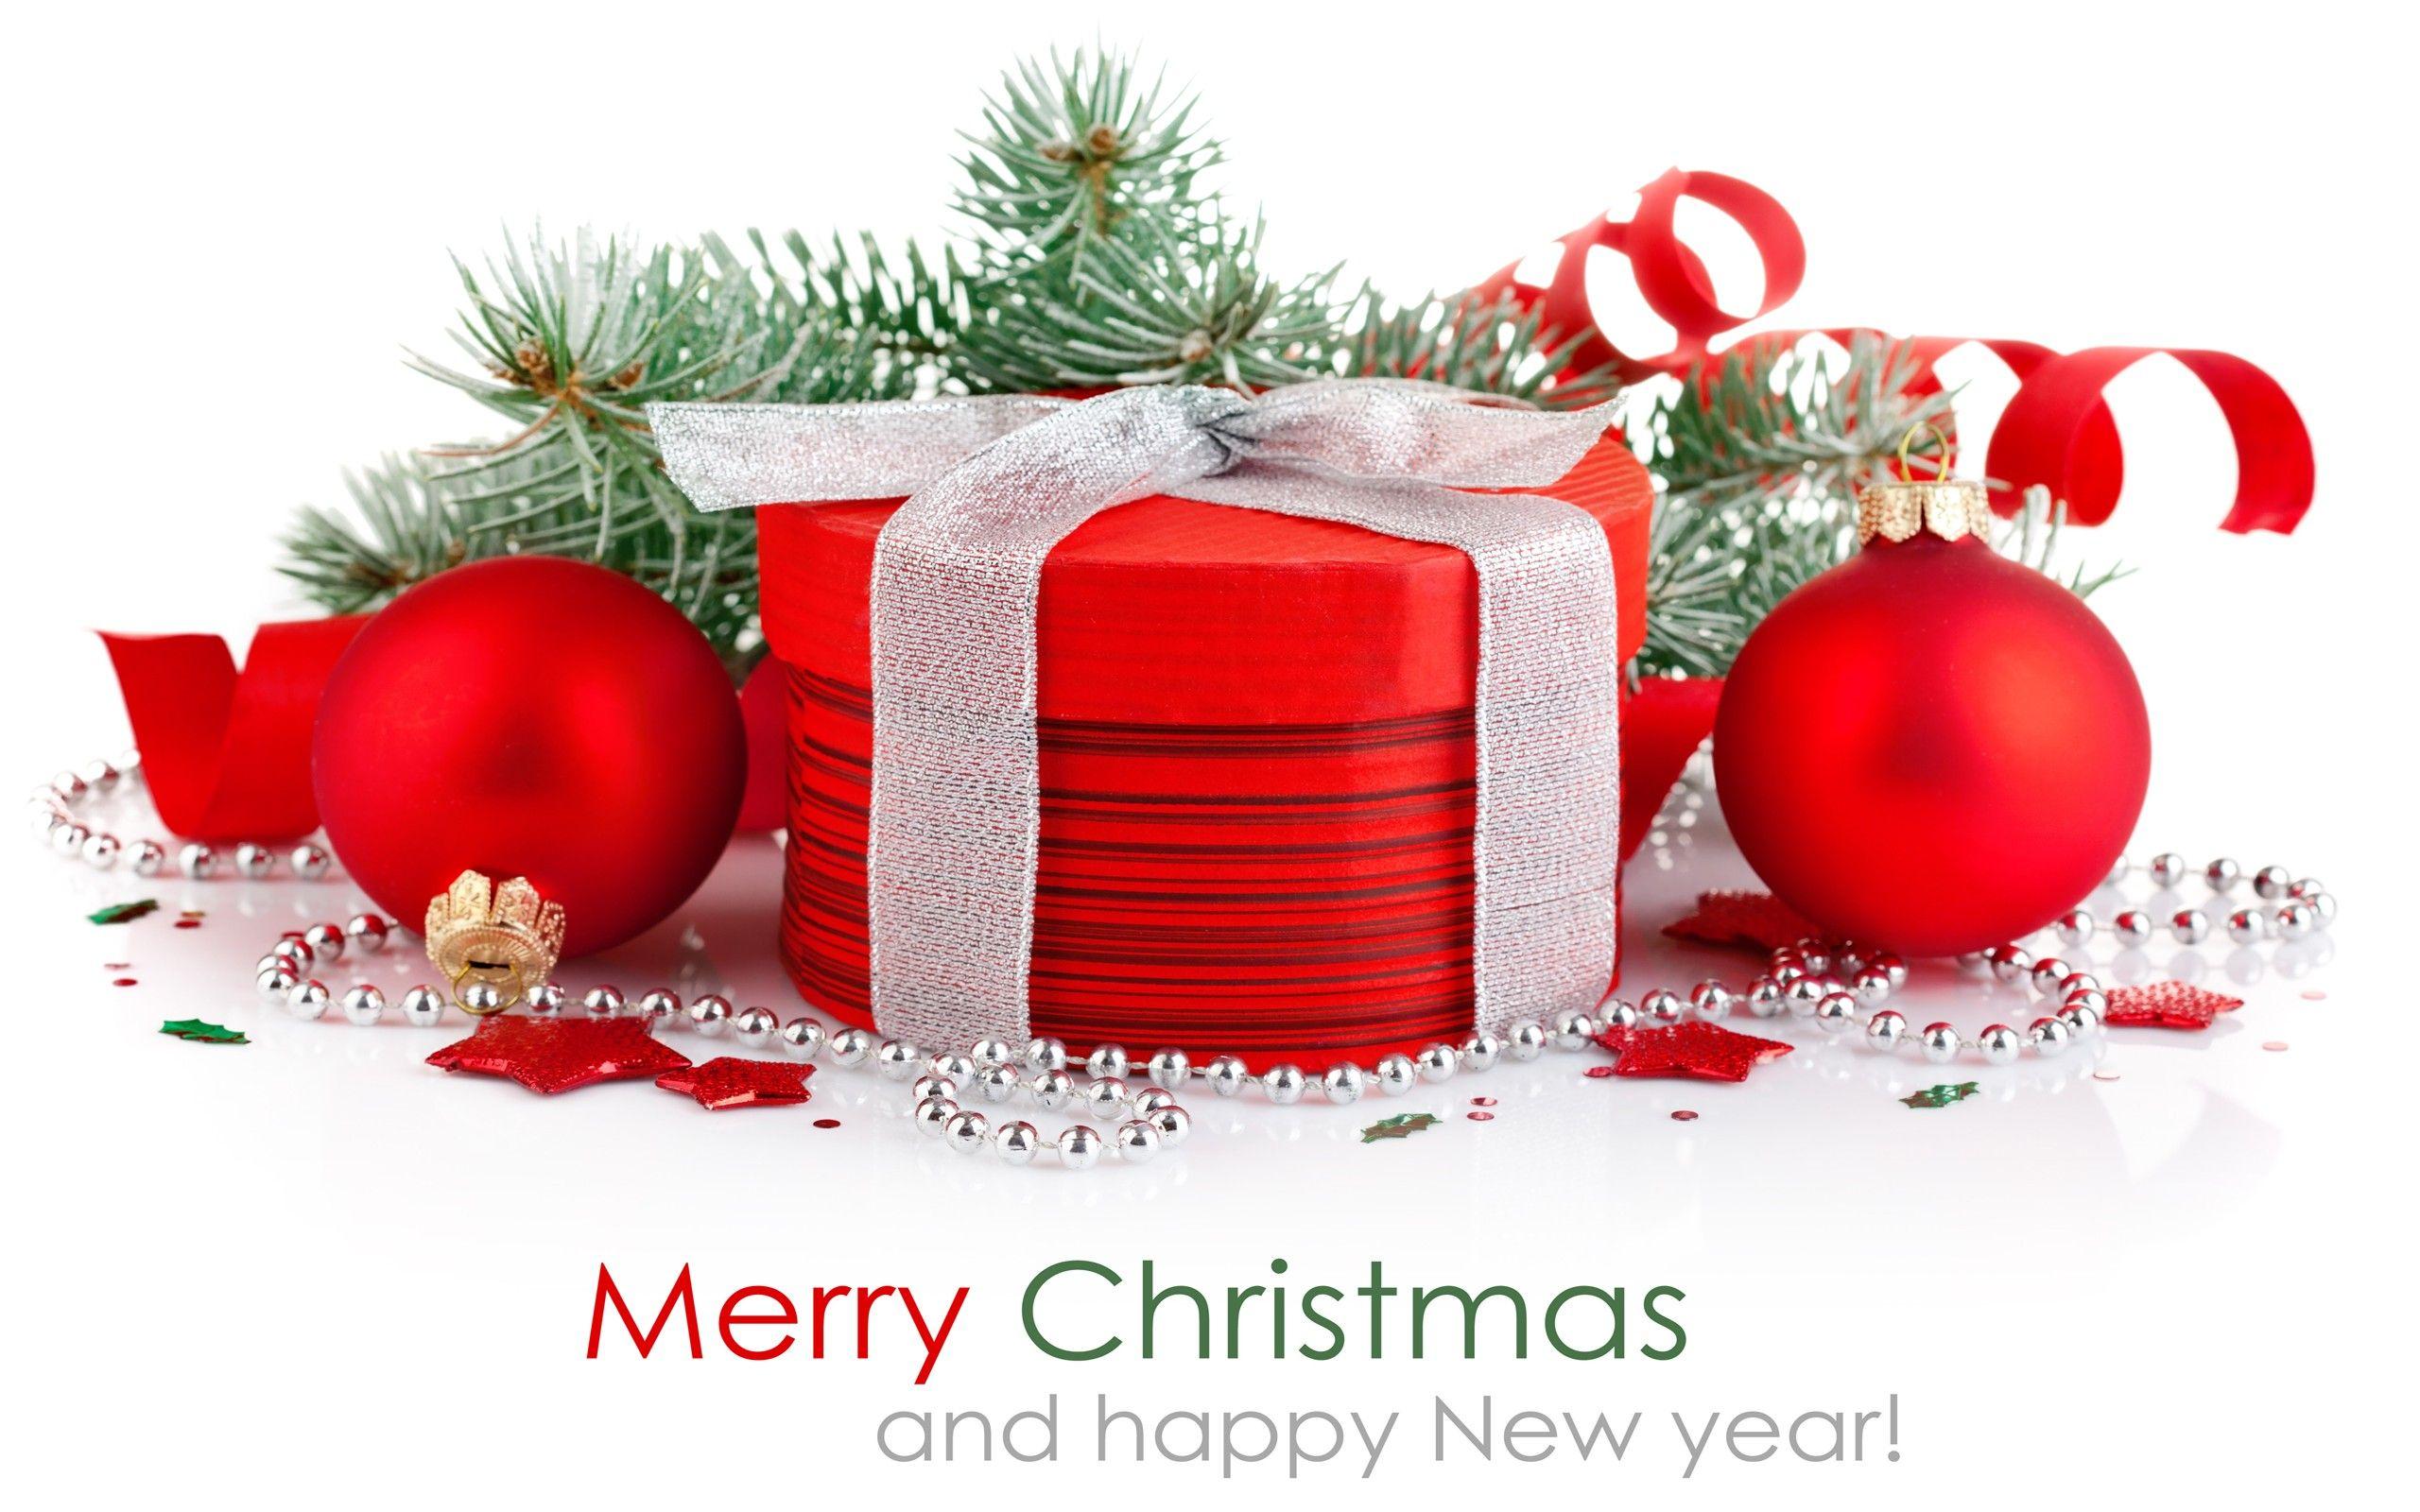 Best Merry Christmas 2018 and Happy New Year 2019 Image, Quotes